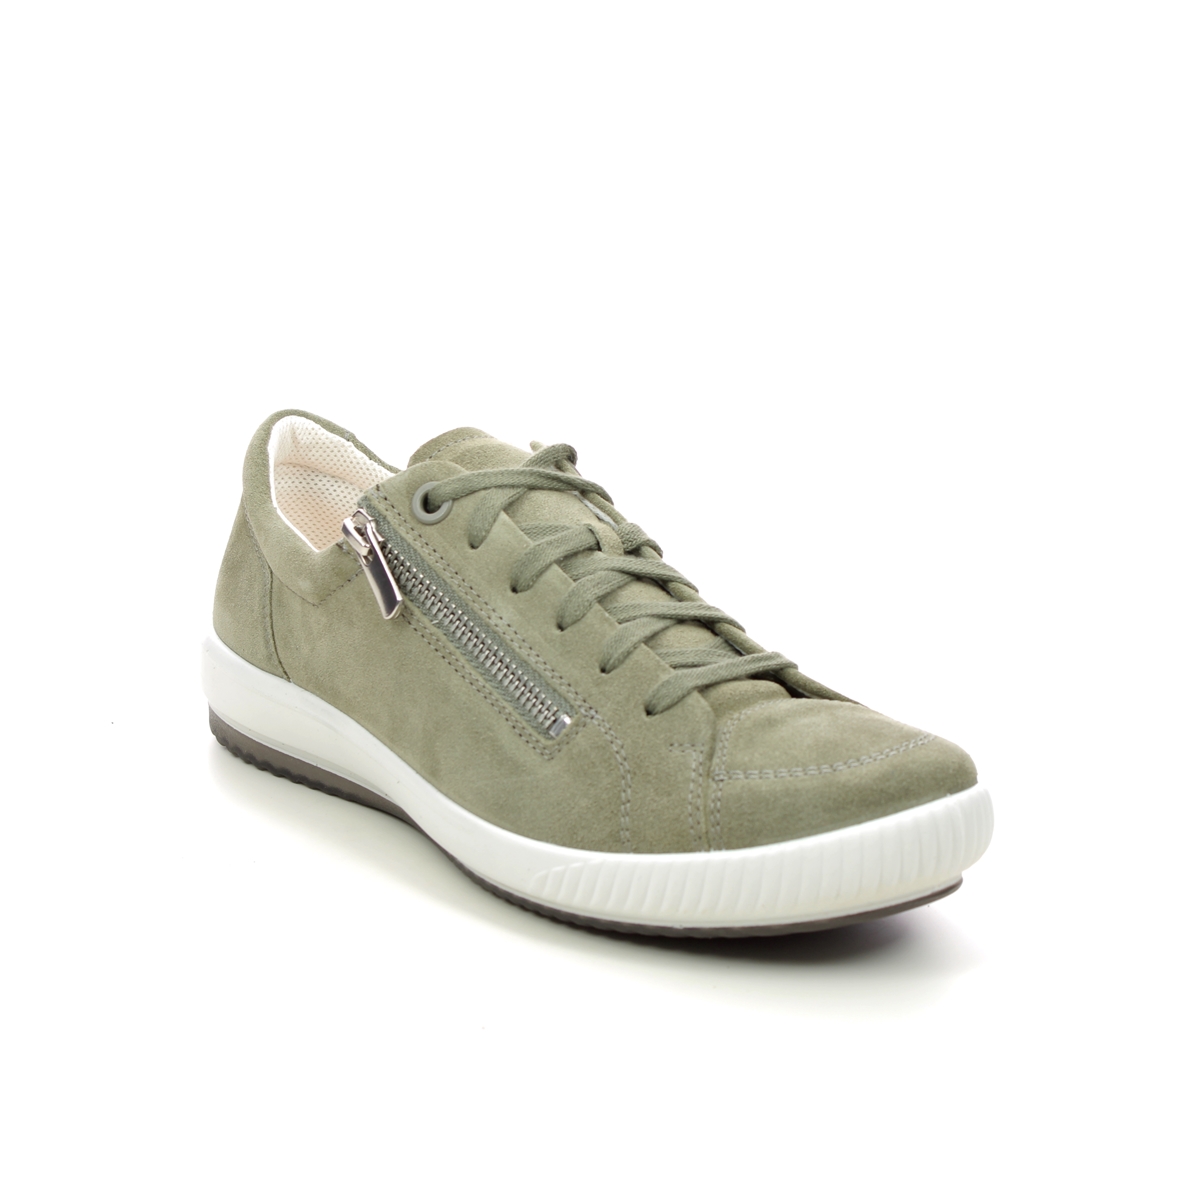 Legero Tanaro 5 Zip Light Green Womens lacing shoes 2000162-7520 in a Plain Leather in Size 8